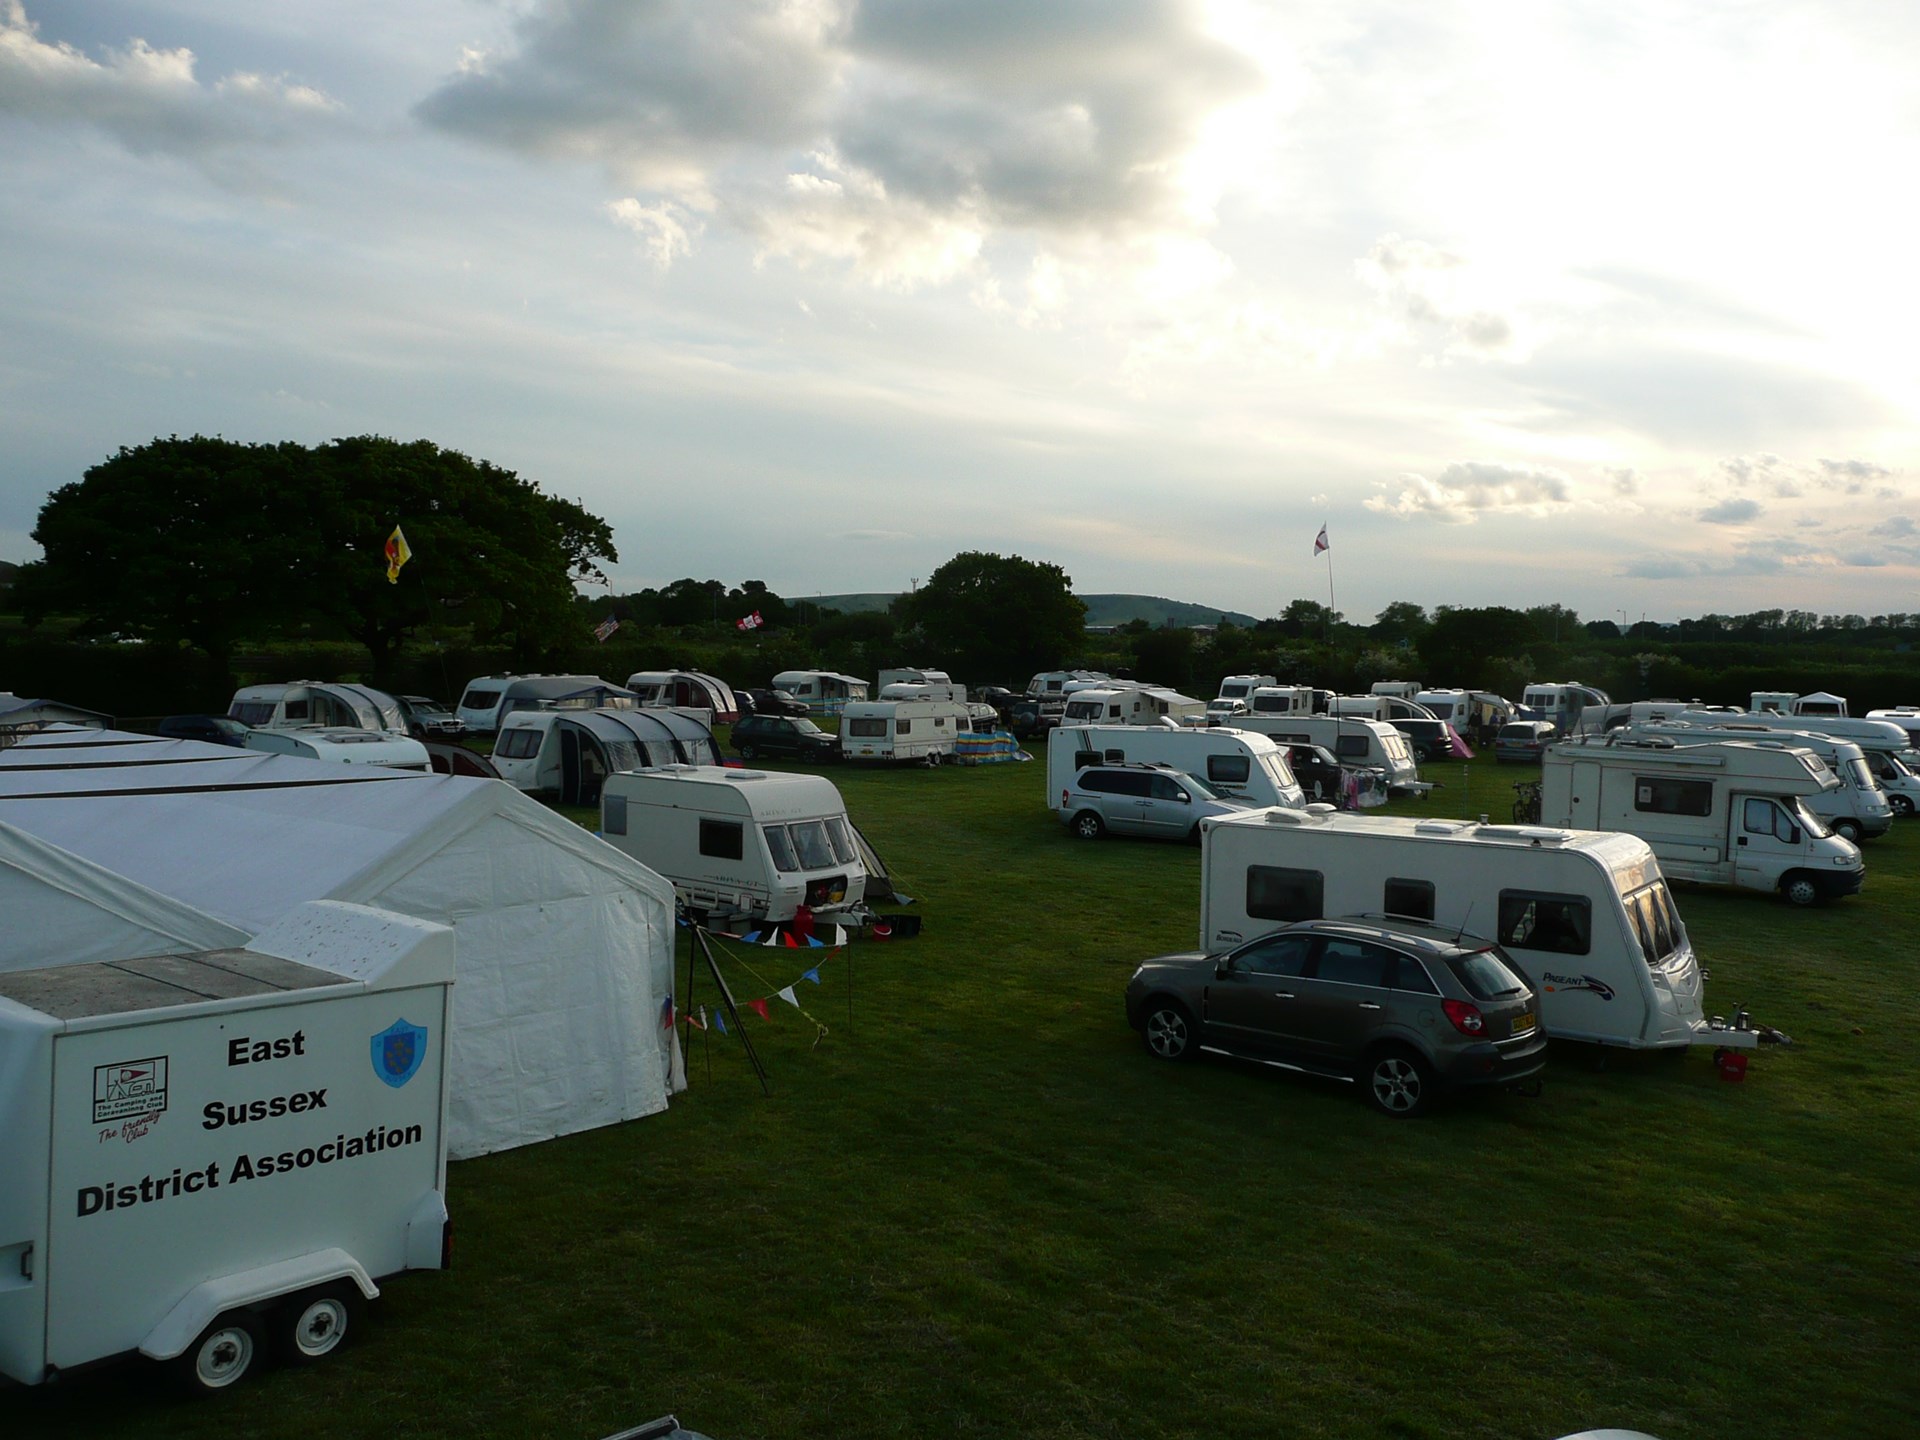 East Sussex DA of the camping and caravanning club About Us